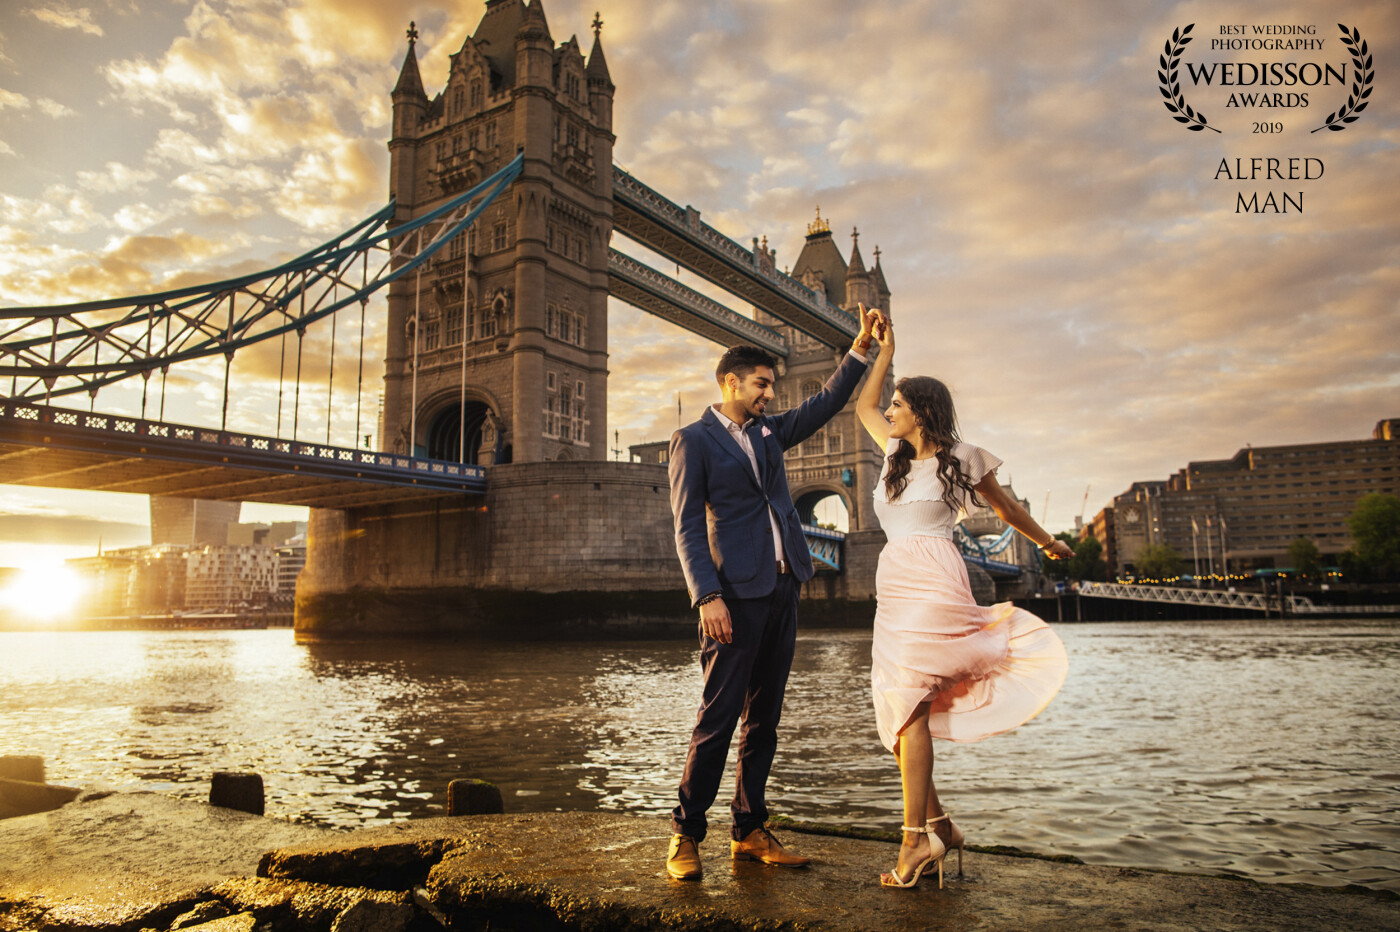 We are thrilled to have this sunset shot with Chandni & Firoz near Tower bridge! It was the moment when the tide reveals the shoreline leaving the ground wet and sparkling. We are so grateful to have our lovely couple taking this adventure with us!